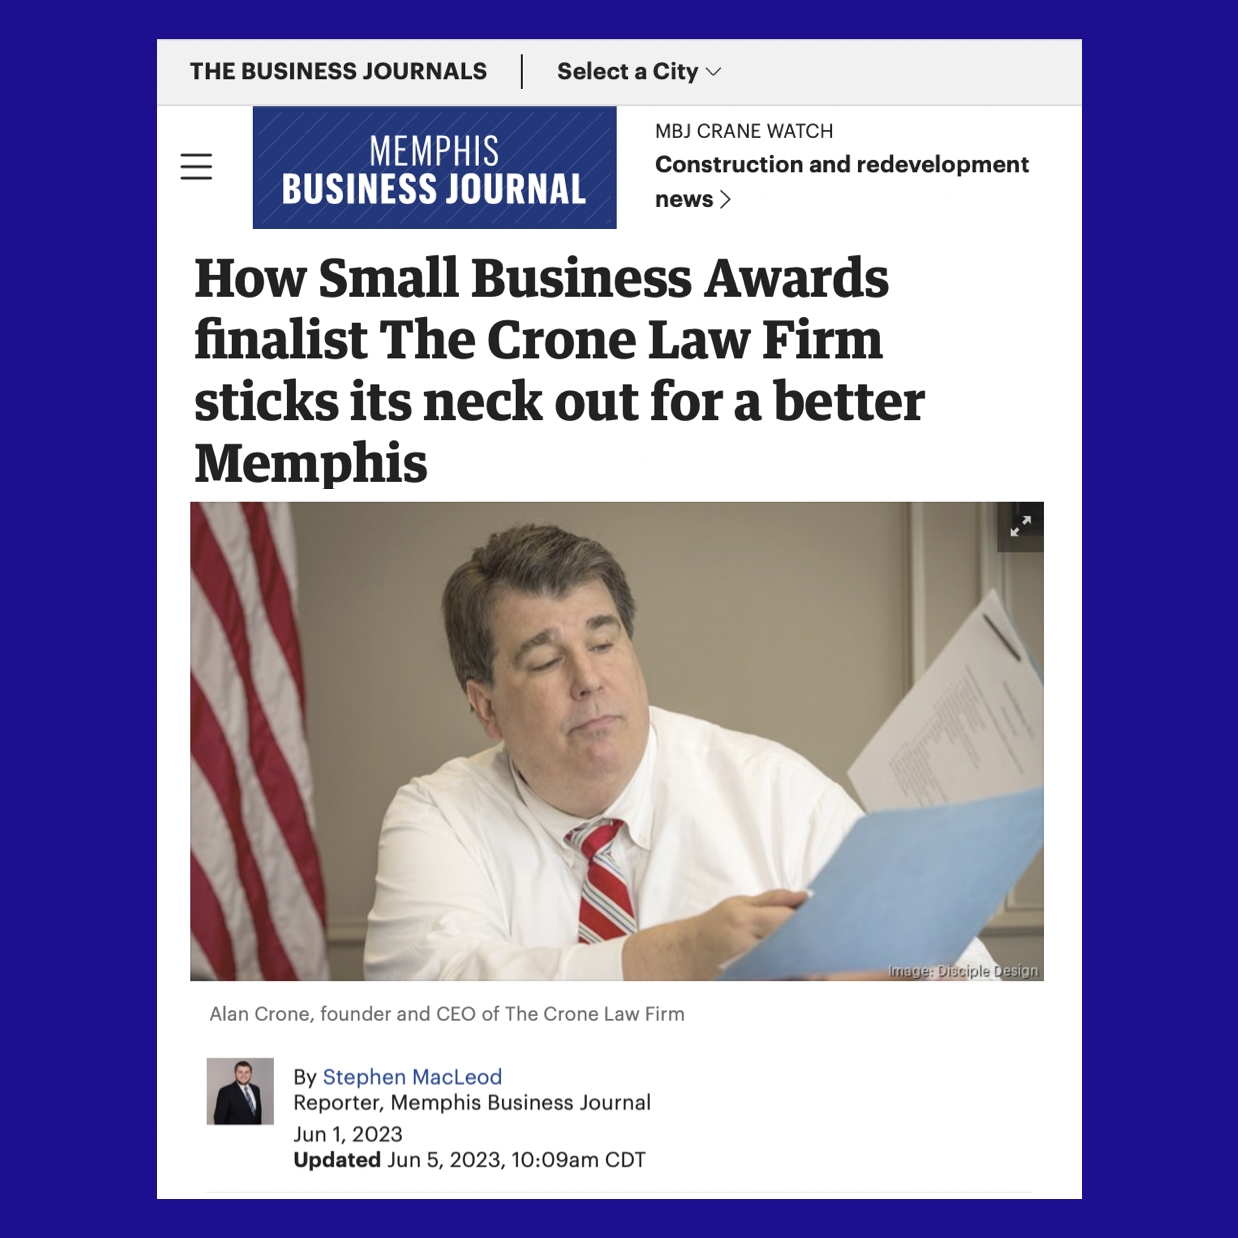 The Crone Law Firm was recognized as 1 of 16 Finalists at the Memphis Business Journal's 43rd Small Business Awards in May 2023, and featured in a MBJ profile story on June 1, 2023.